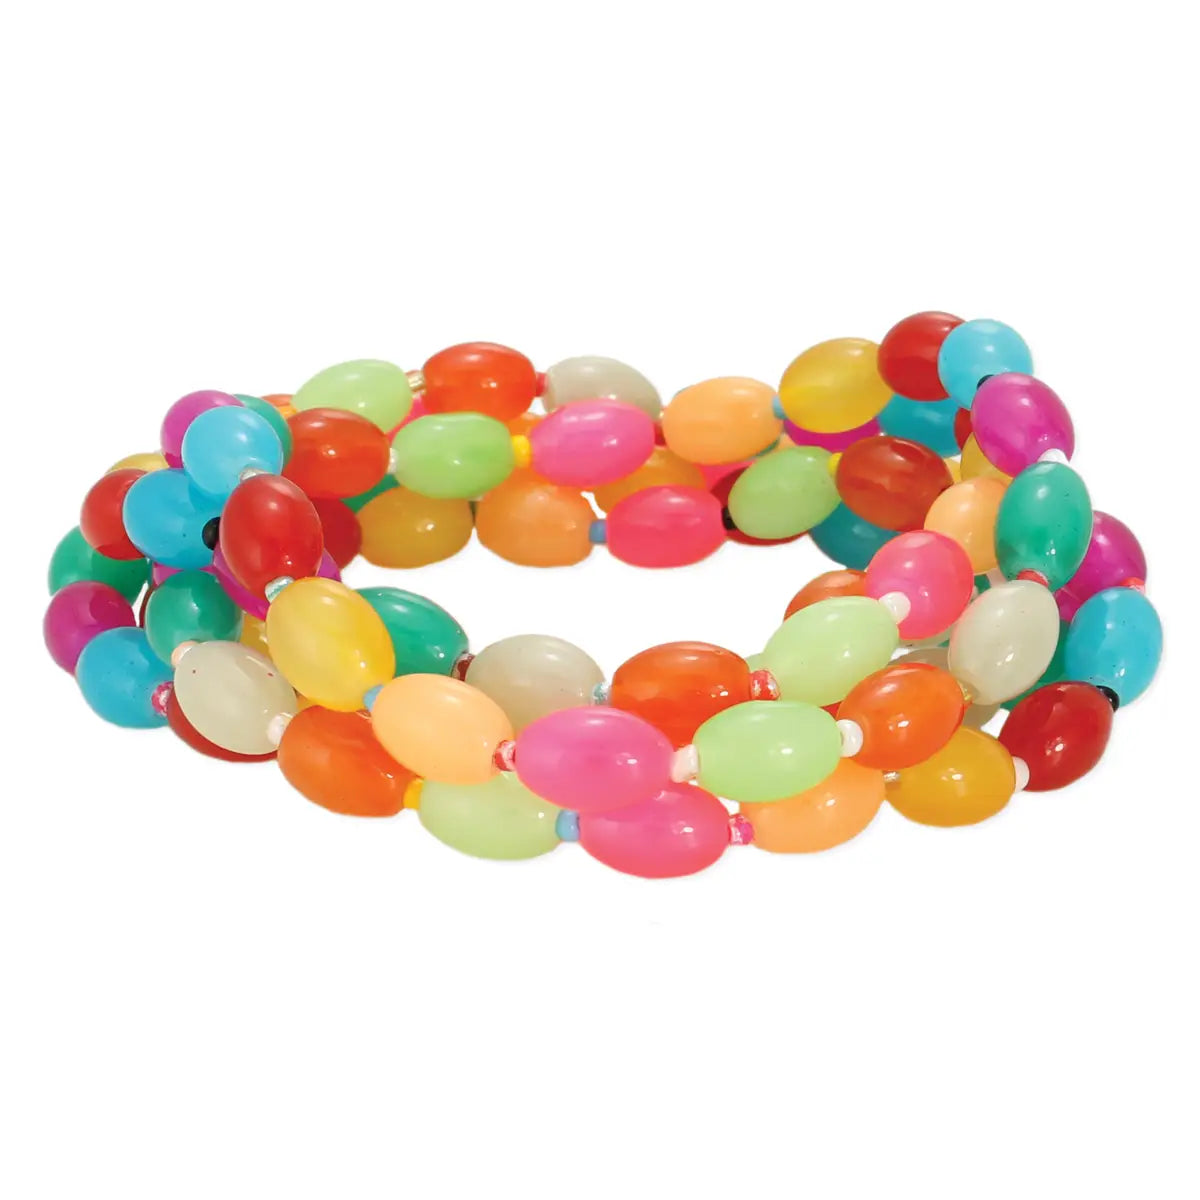 A set of 5 bracelets of neon colored glass beads resembling jellybeans 